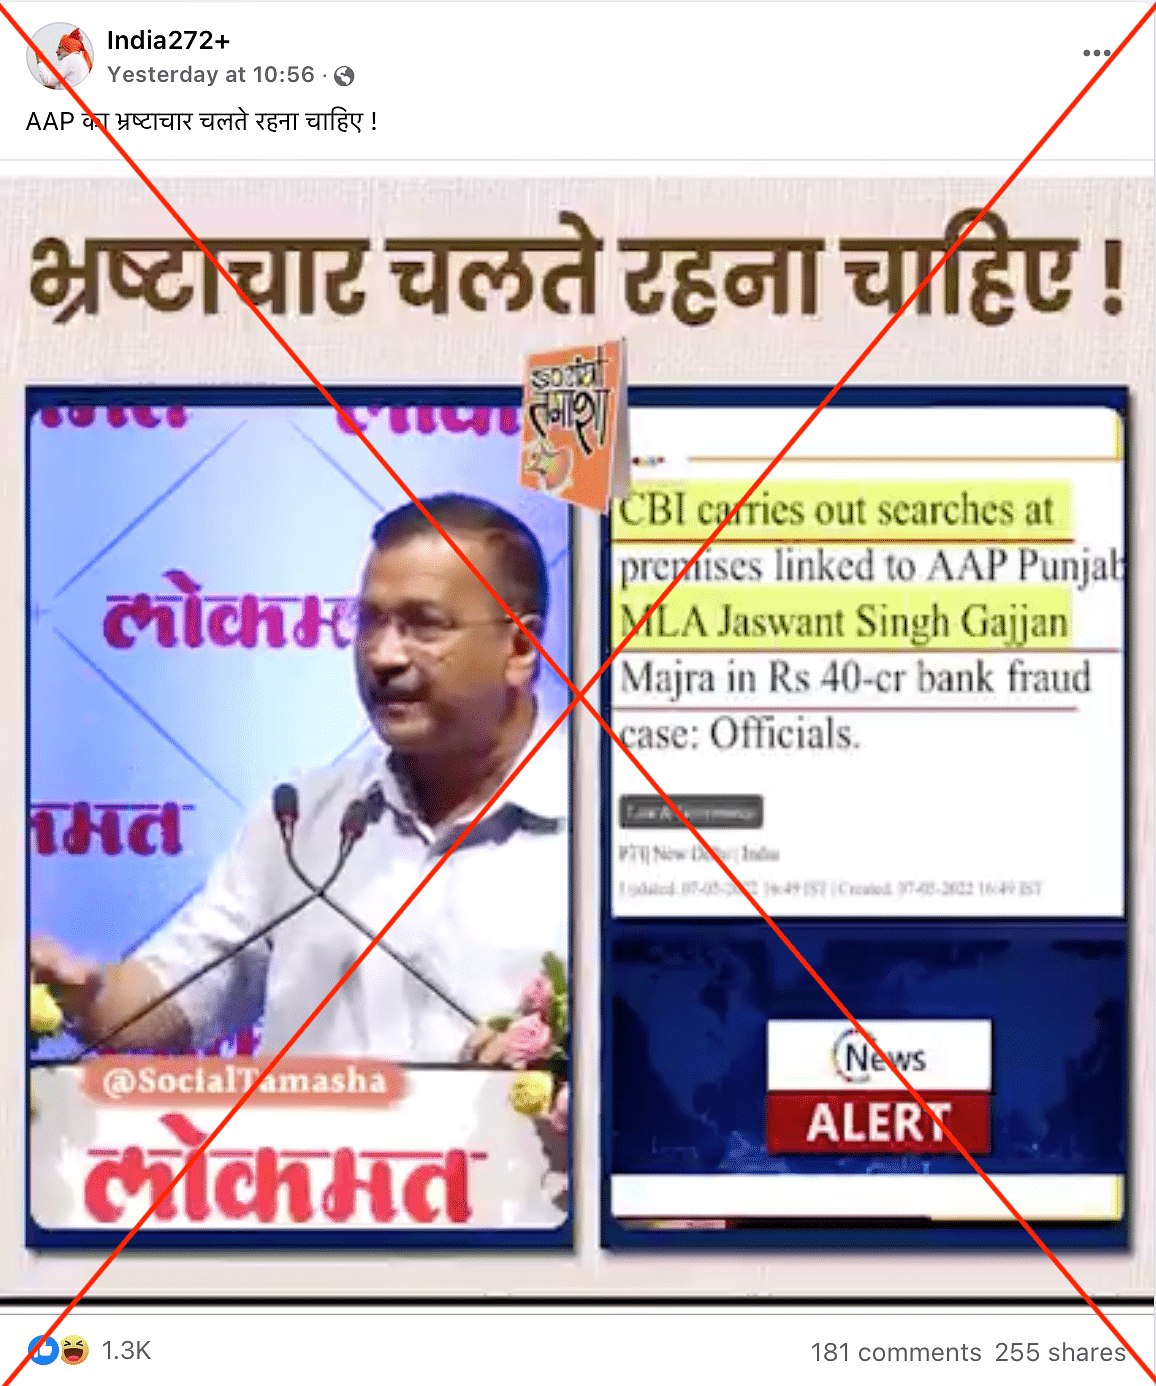 The video has been clipped and shared out of context to insinuate that Kejriwal and AAP support corruption.